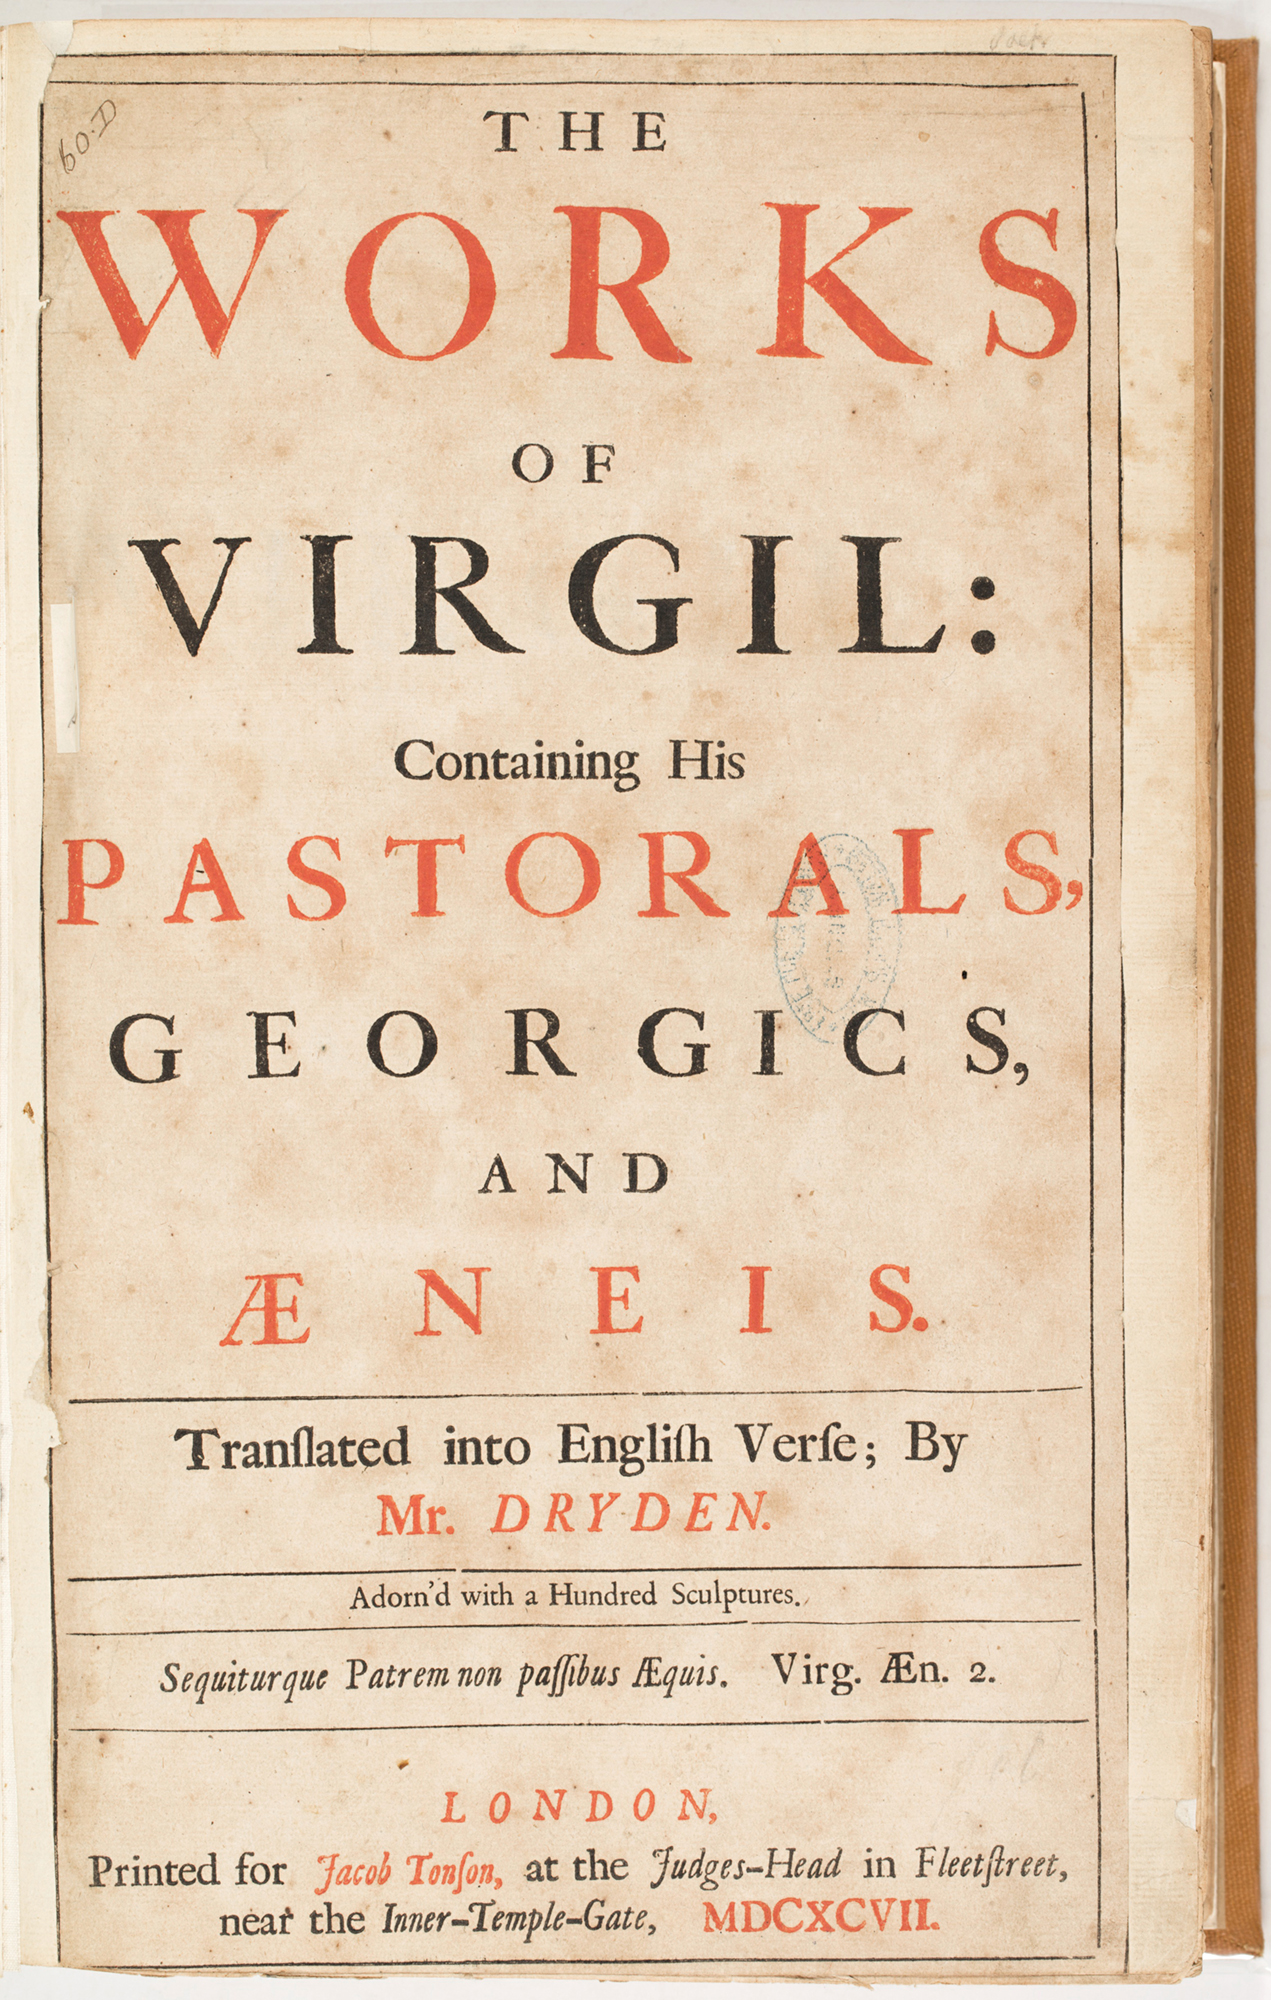 The works of Virgil: containing his Pastorals, Georgics, and Aeneis, 1697, by John Dryden